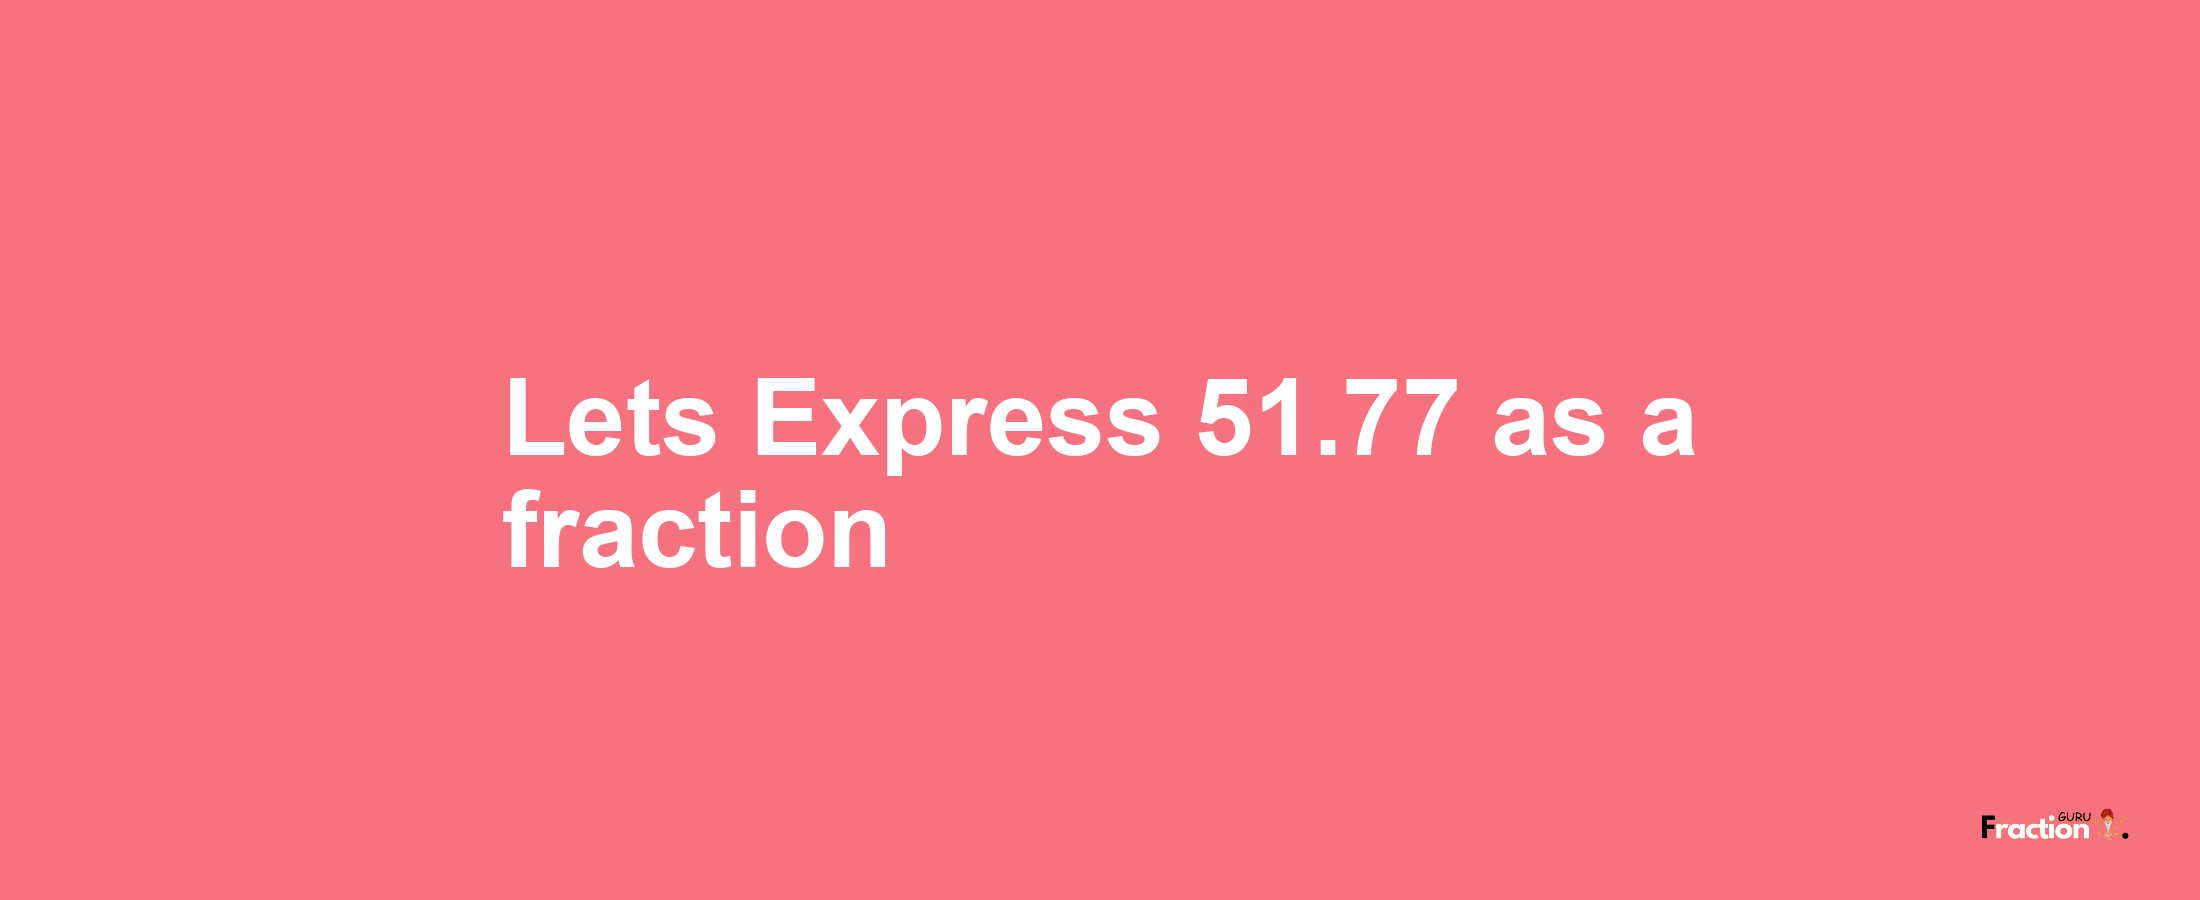 Lets Express 51.77 as afraction